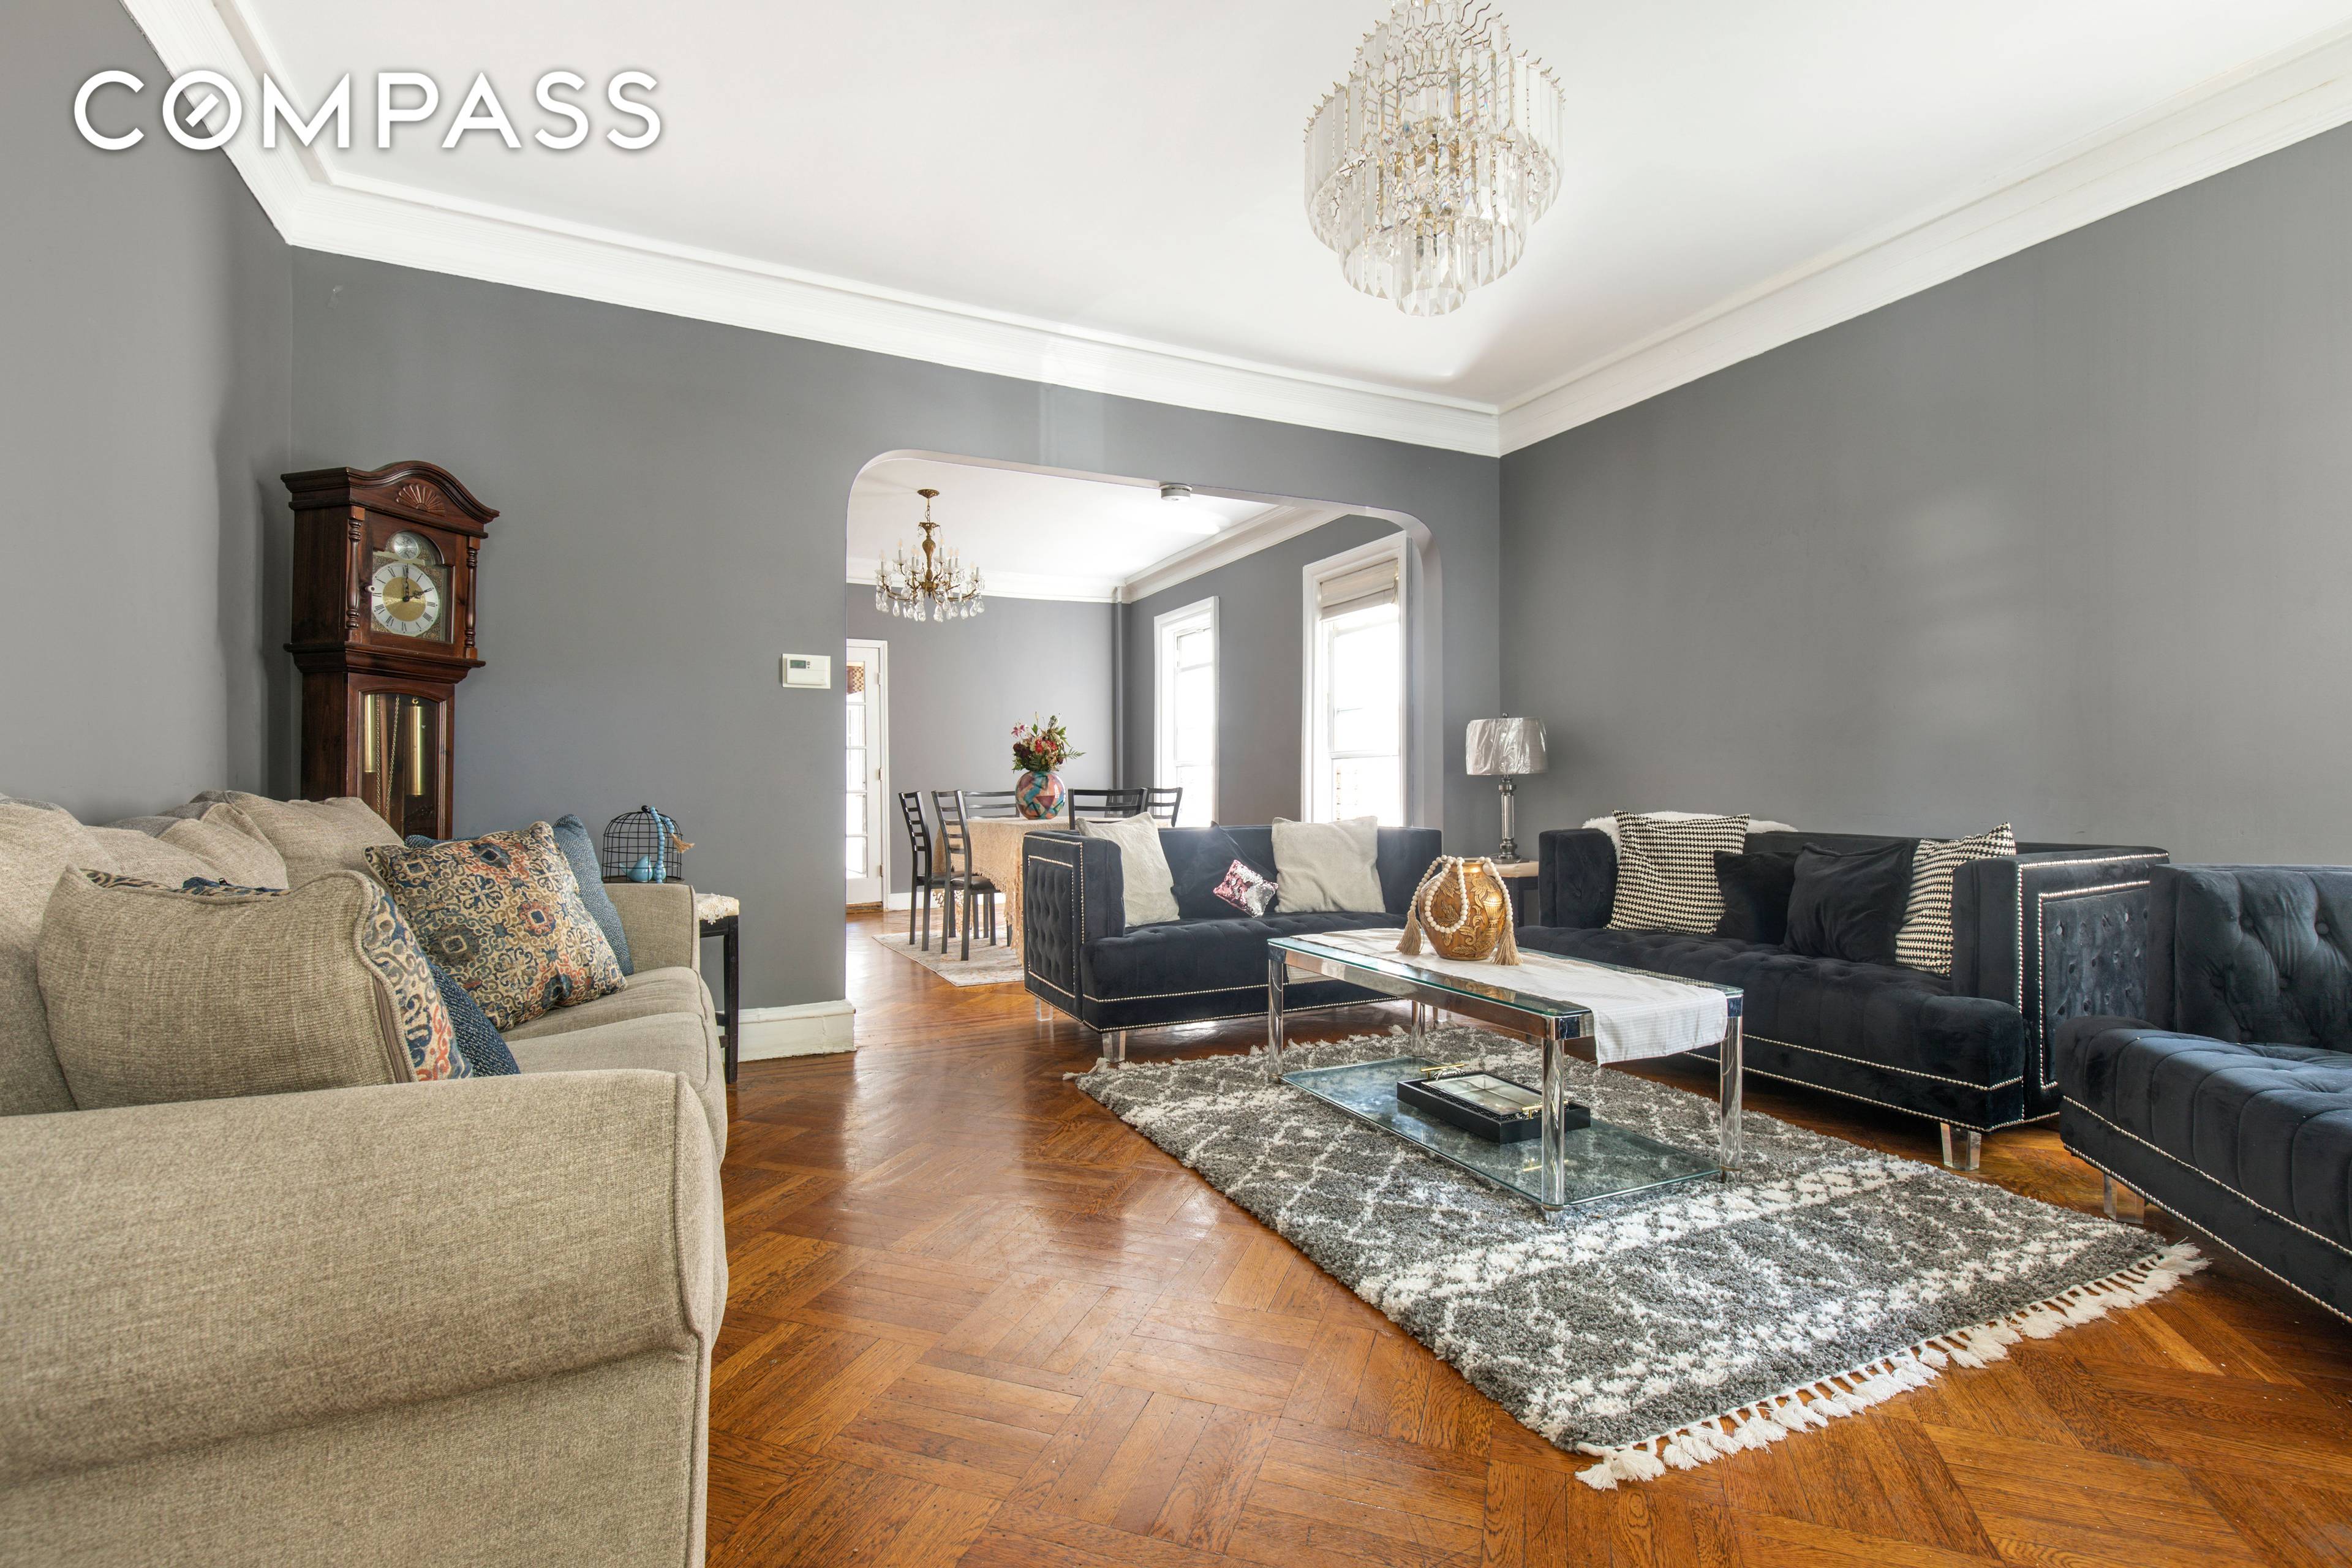 Welcome to 546 85th Street, situated in a prime location in Bay Ridge, Brooklyn.